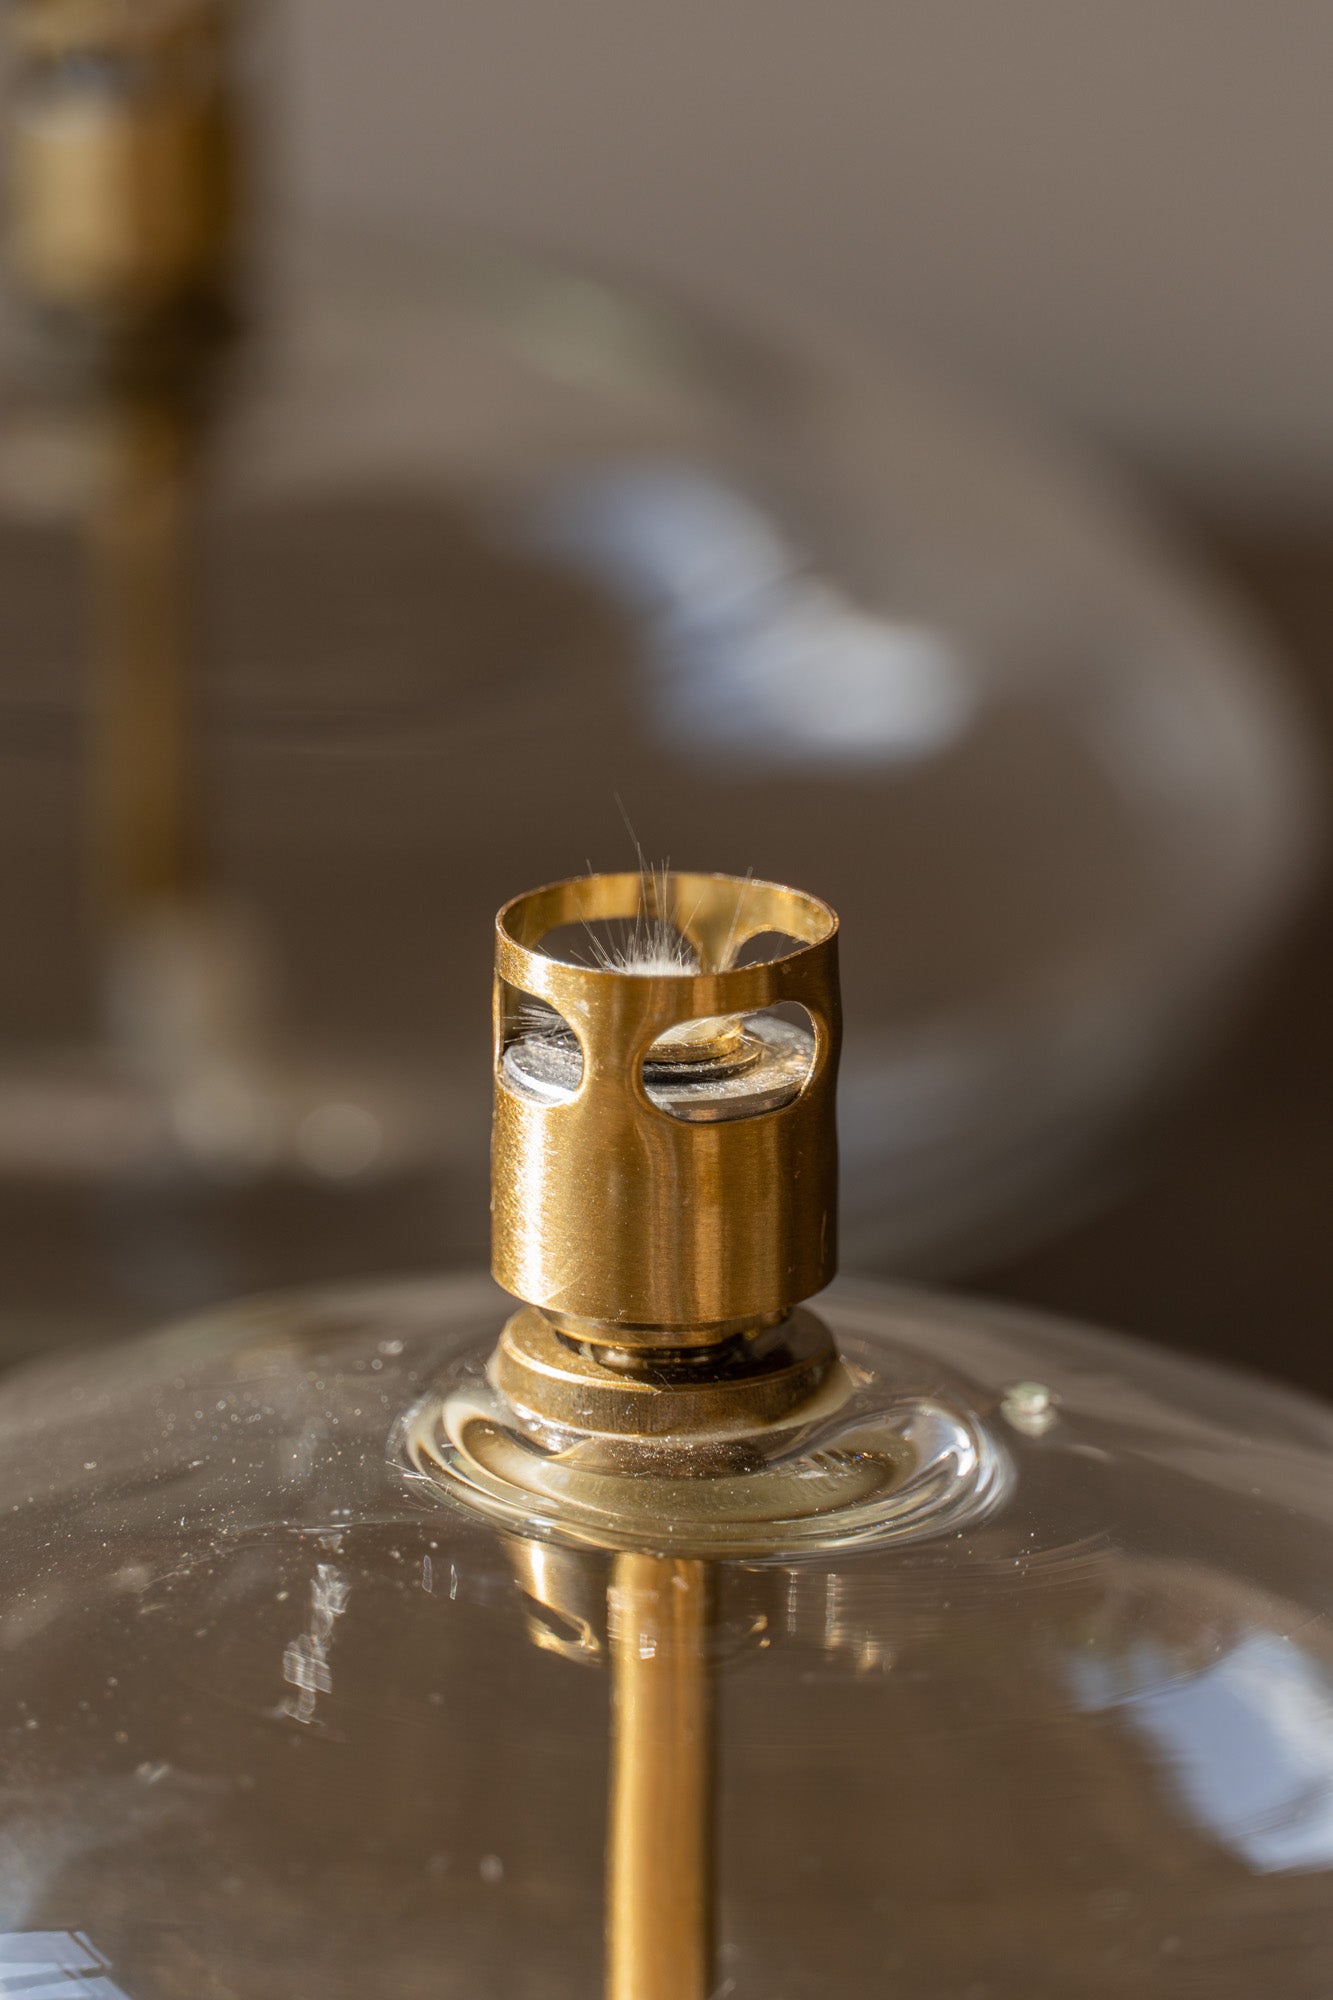 Details of the Ova Oil Lamp by The Loft Selects.